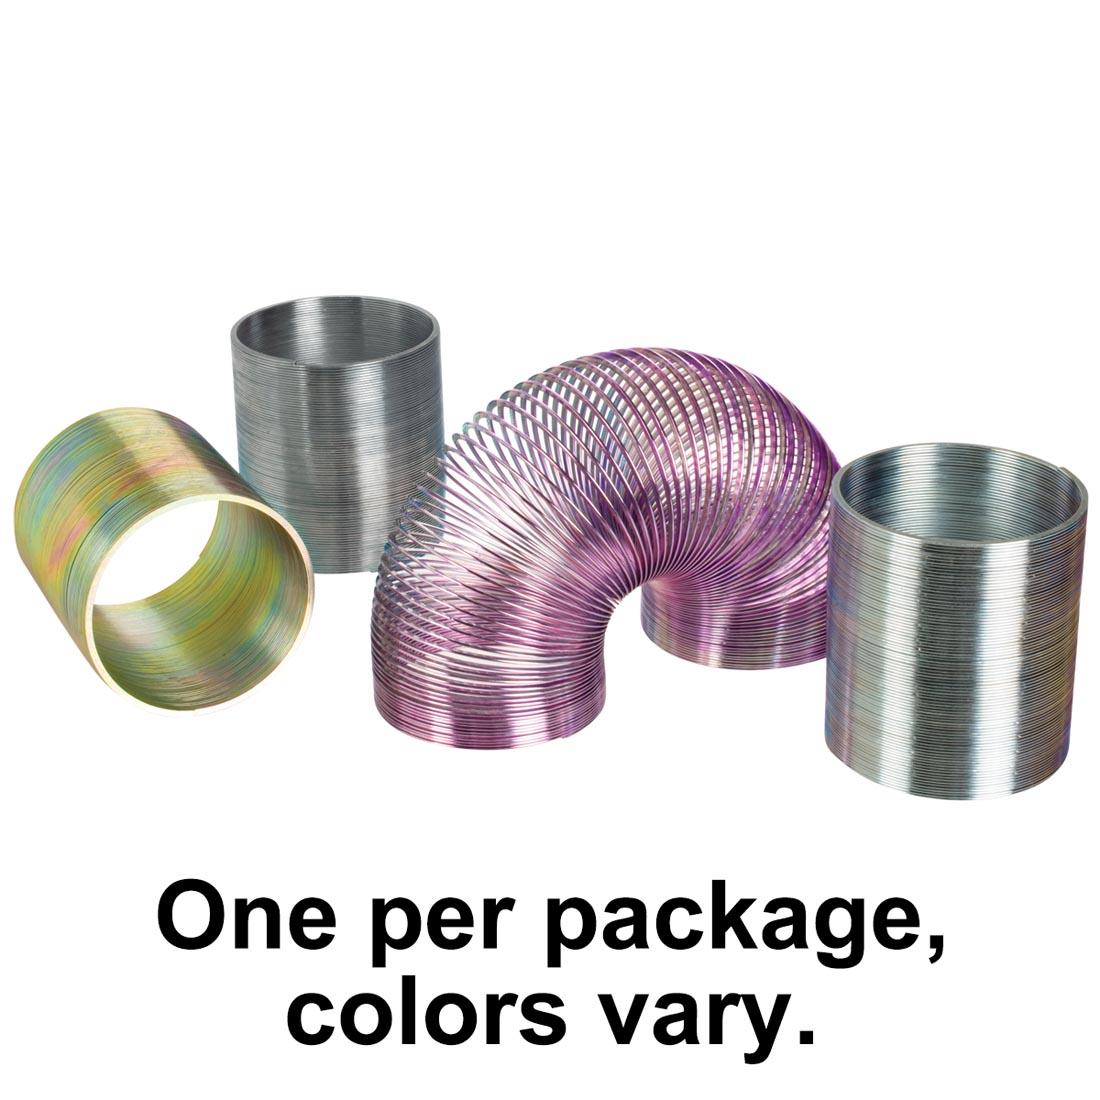 Four different Metal Magic Springs with the text One per package, colors vary.